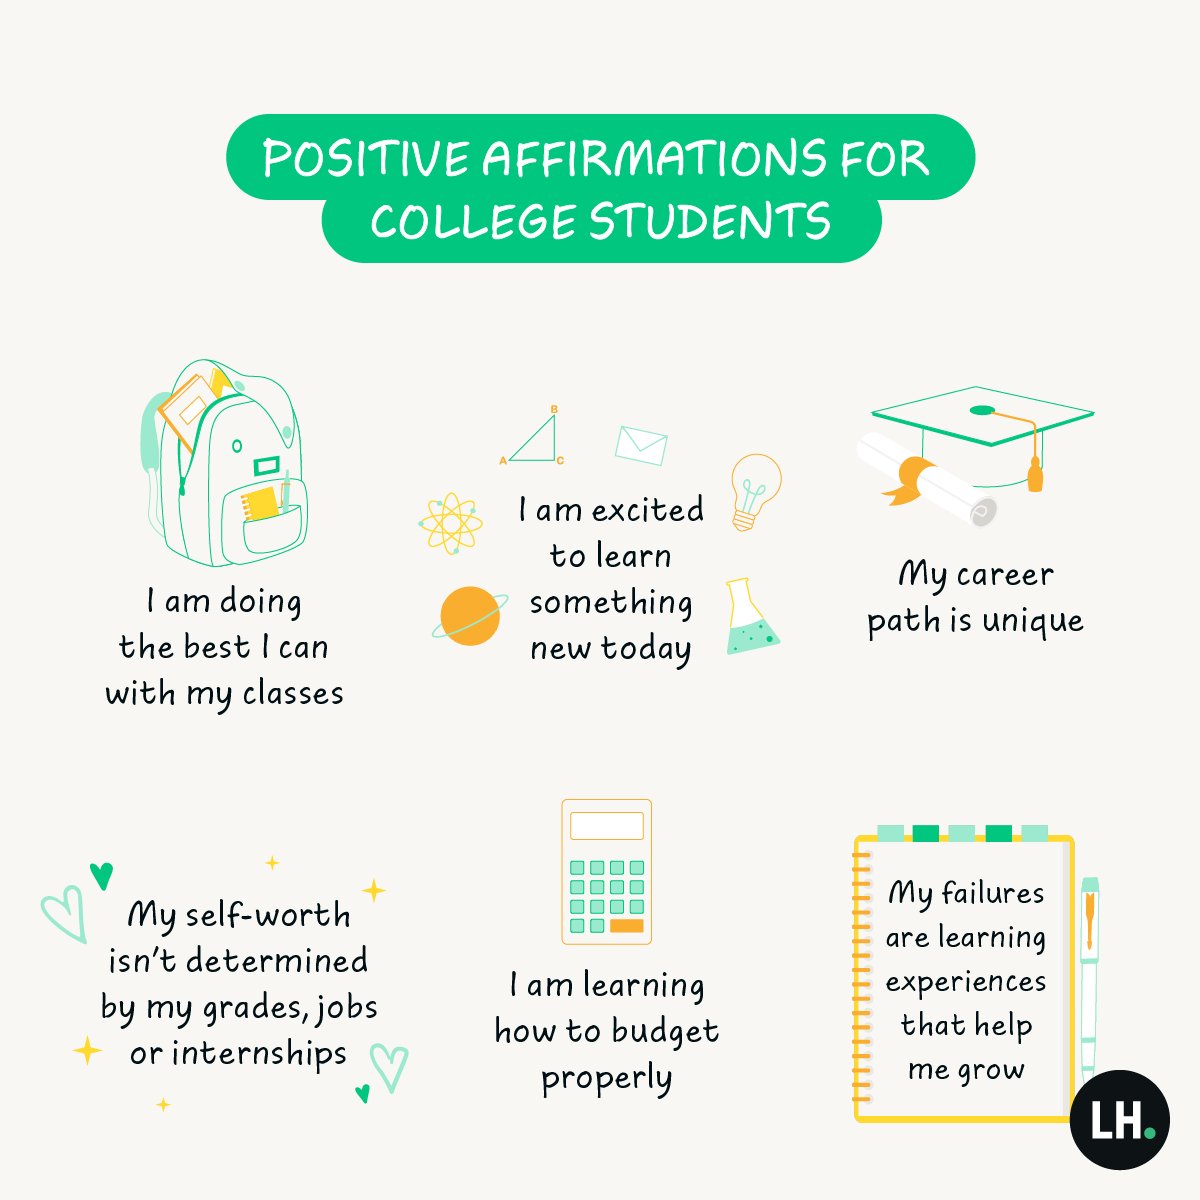 College Students...we got you.  #affirmations #collegestudents #independentinsuranceagent